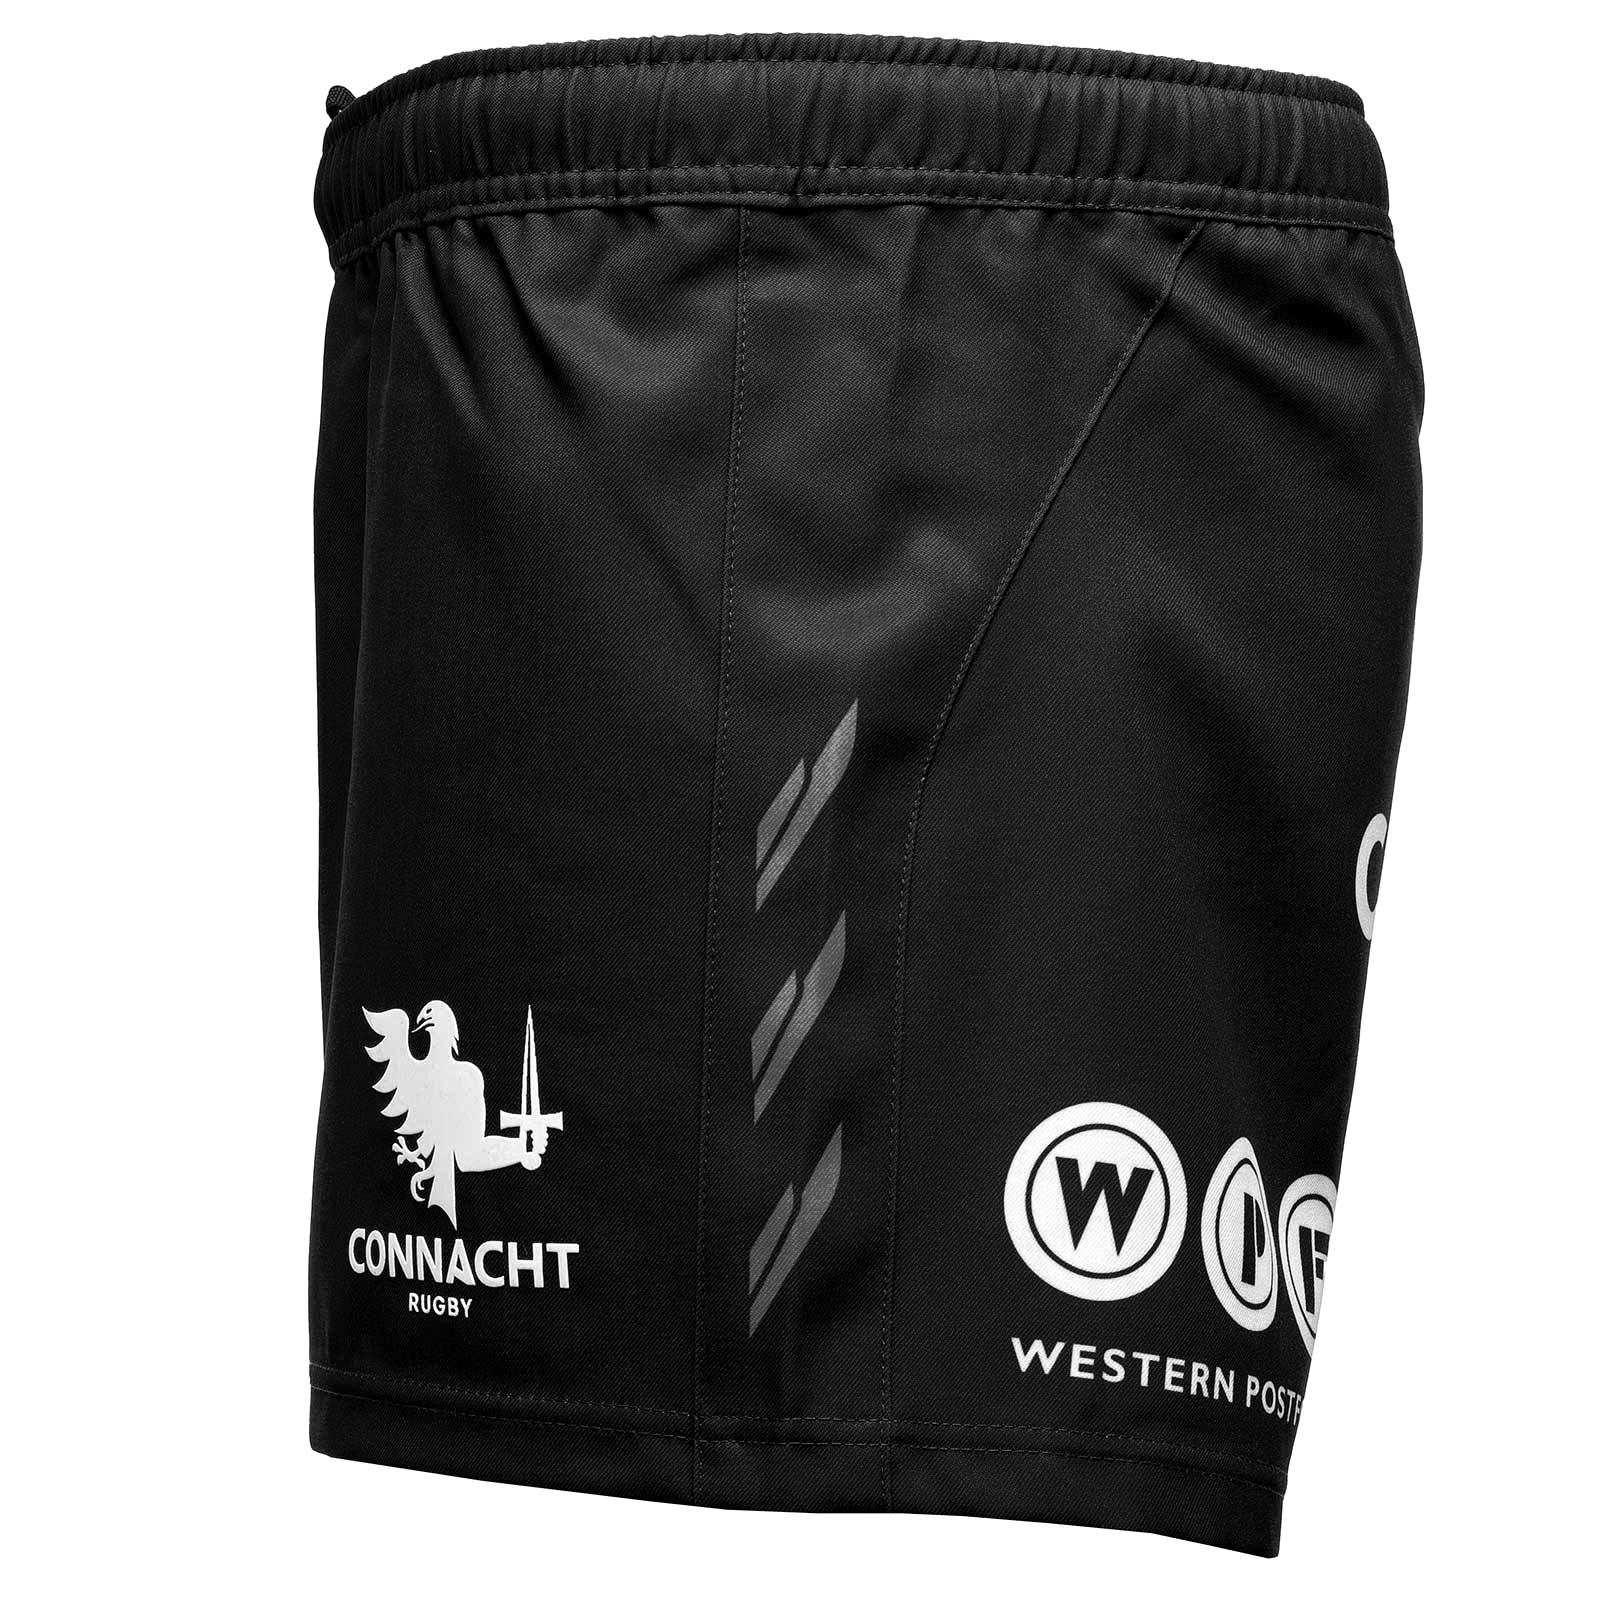 BLK CONNACHT RUGBY 2022/23 AWAY SHORTS